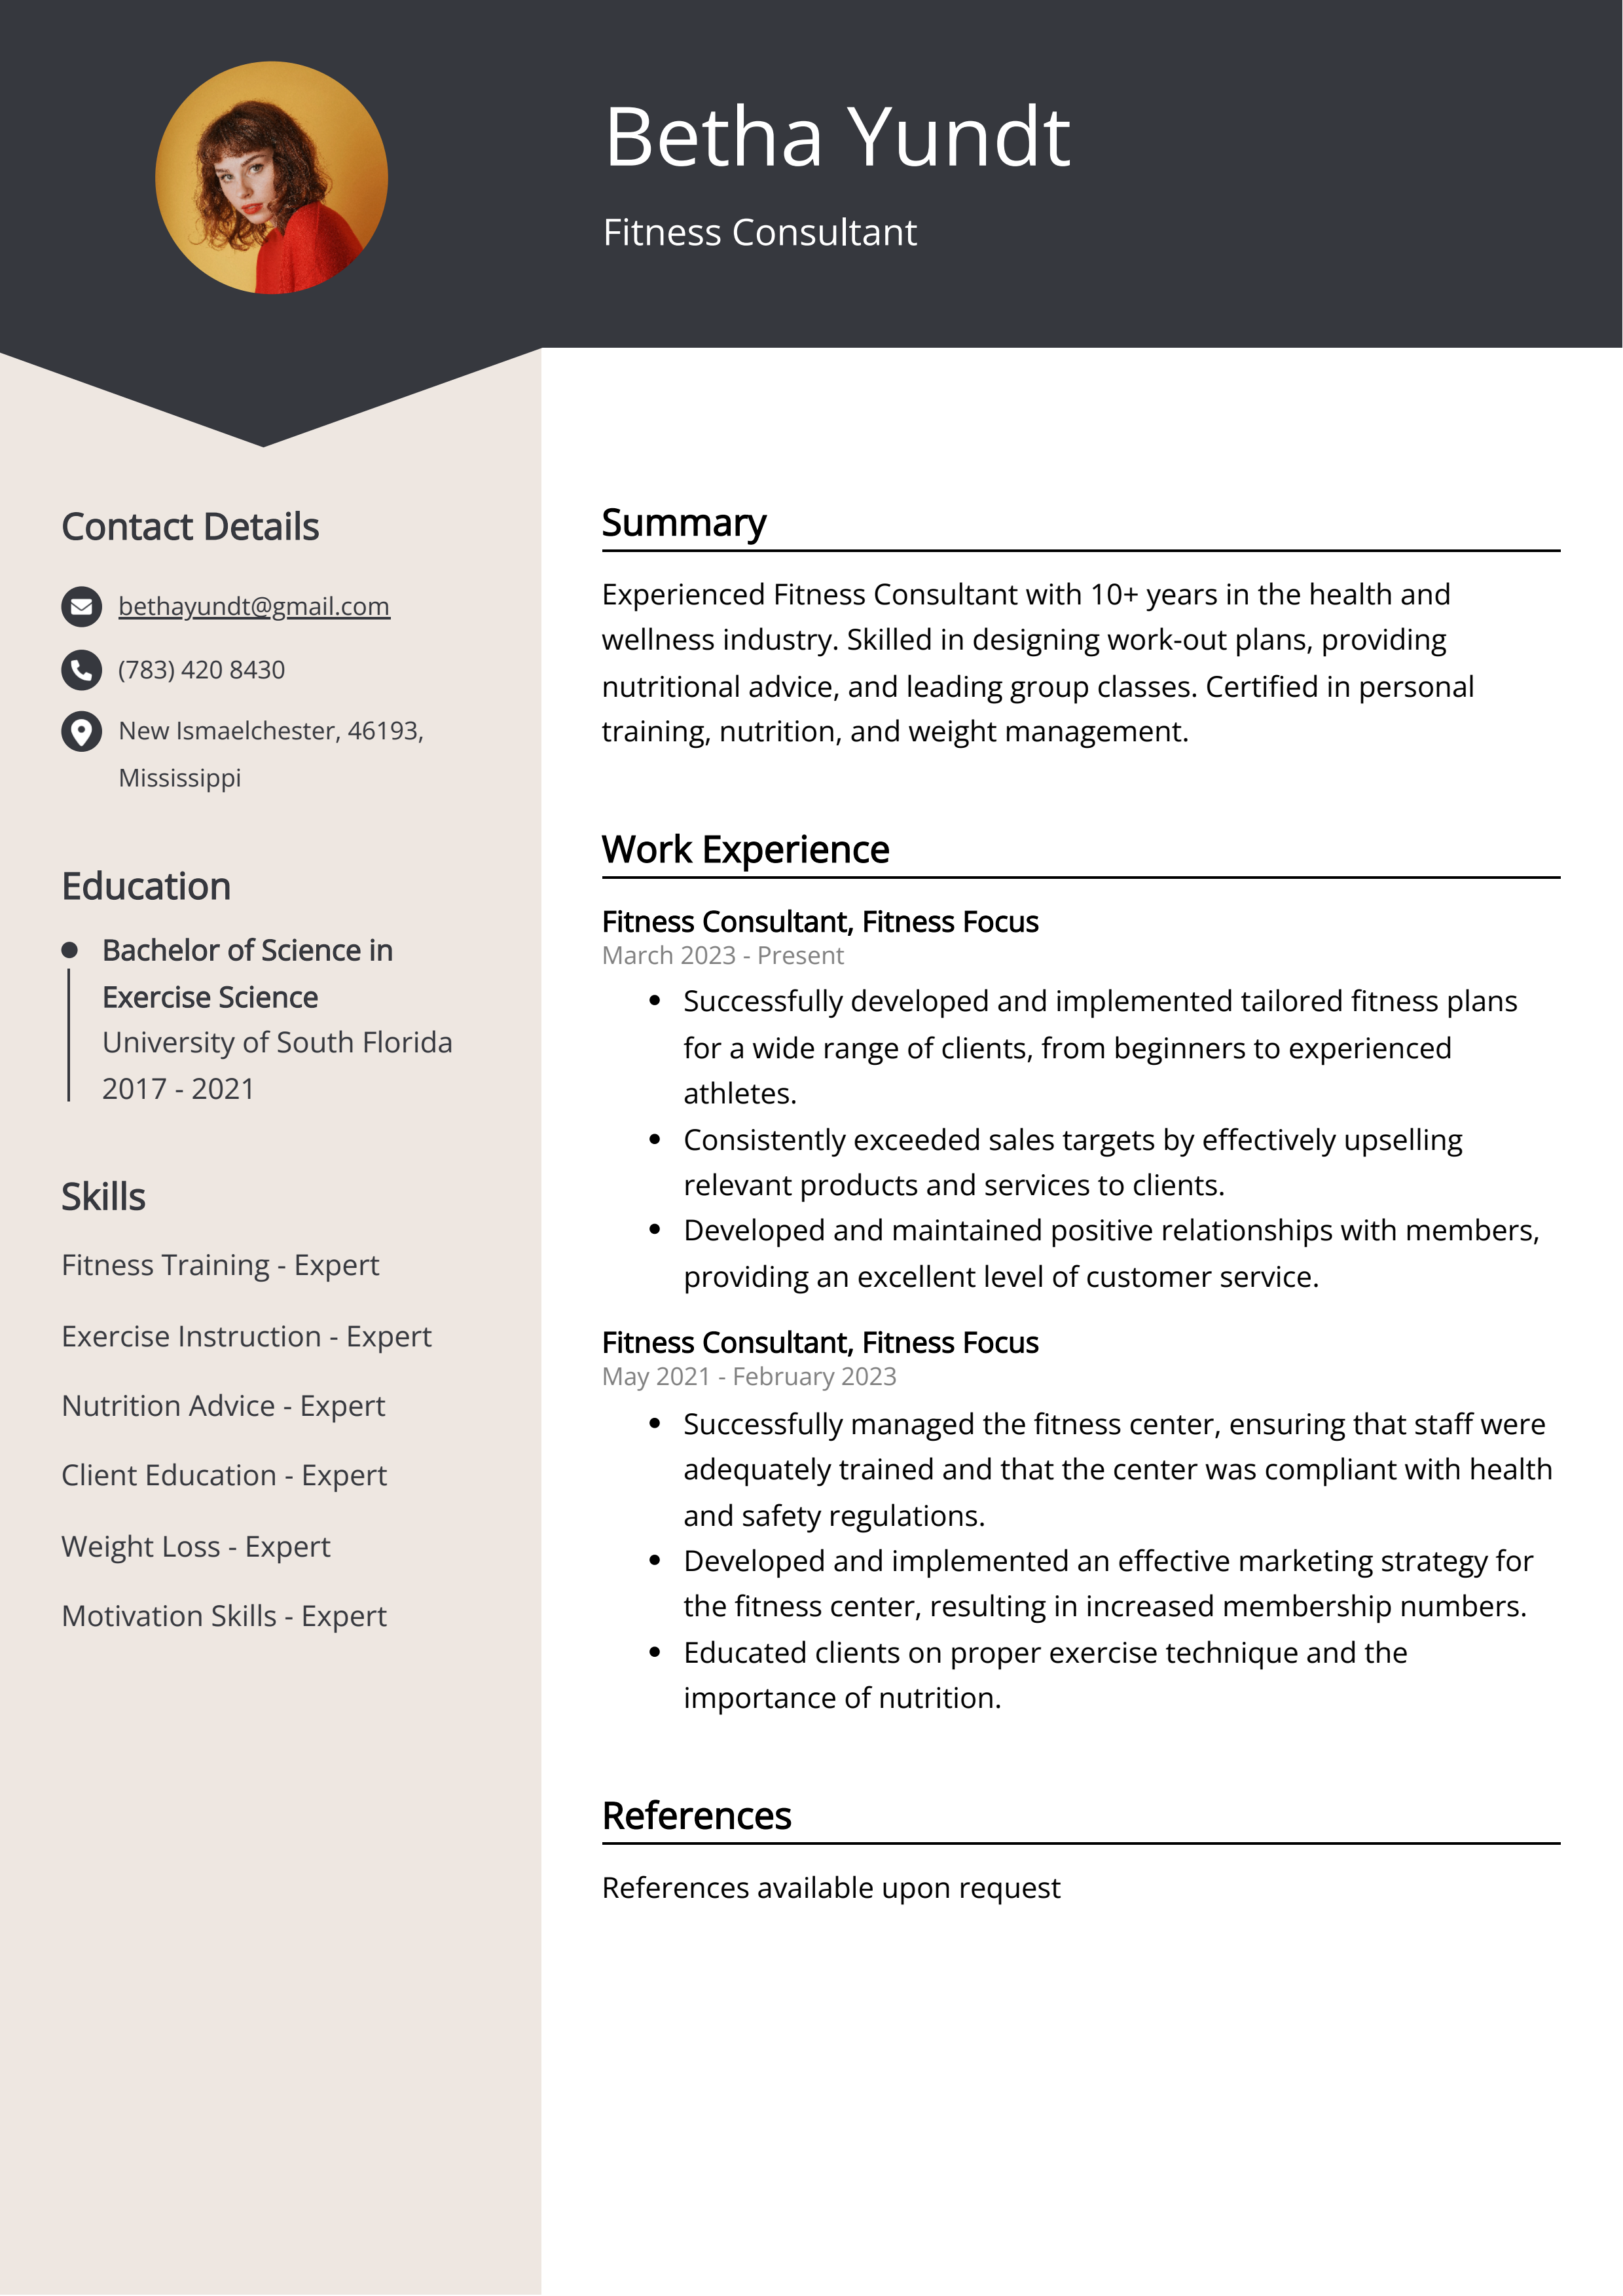 Fitness Consultant CV Example